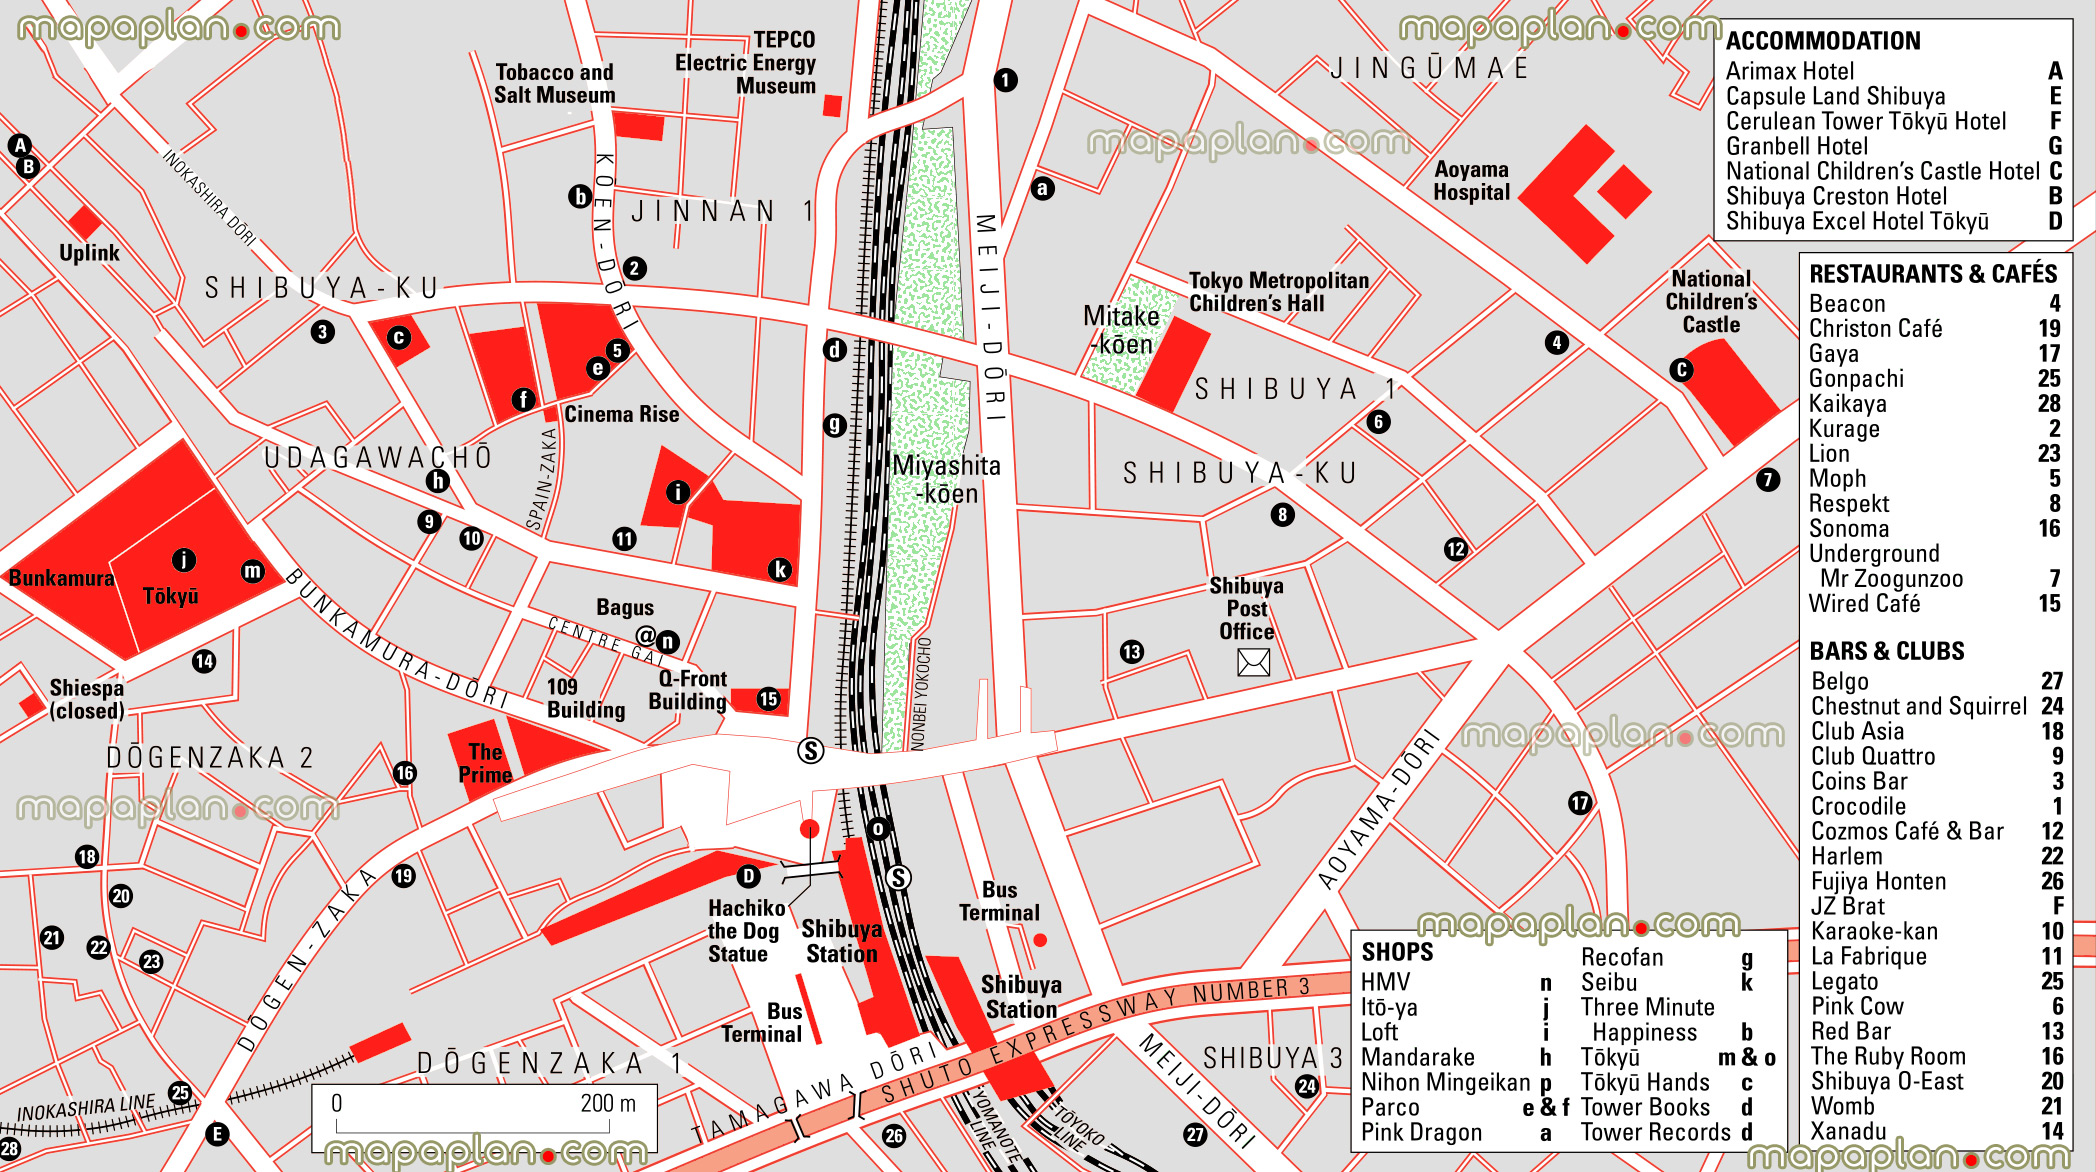 shibuya crossing location metro train station hachiko dog statue station exits Tokyo top tourist attractions map